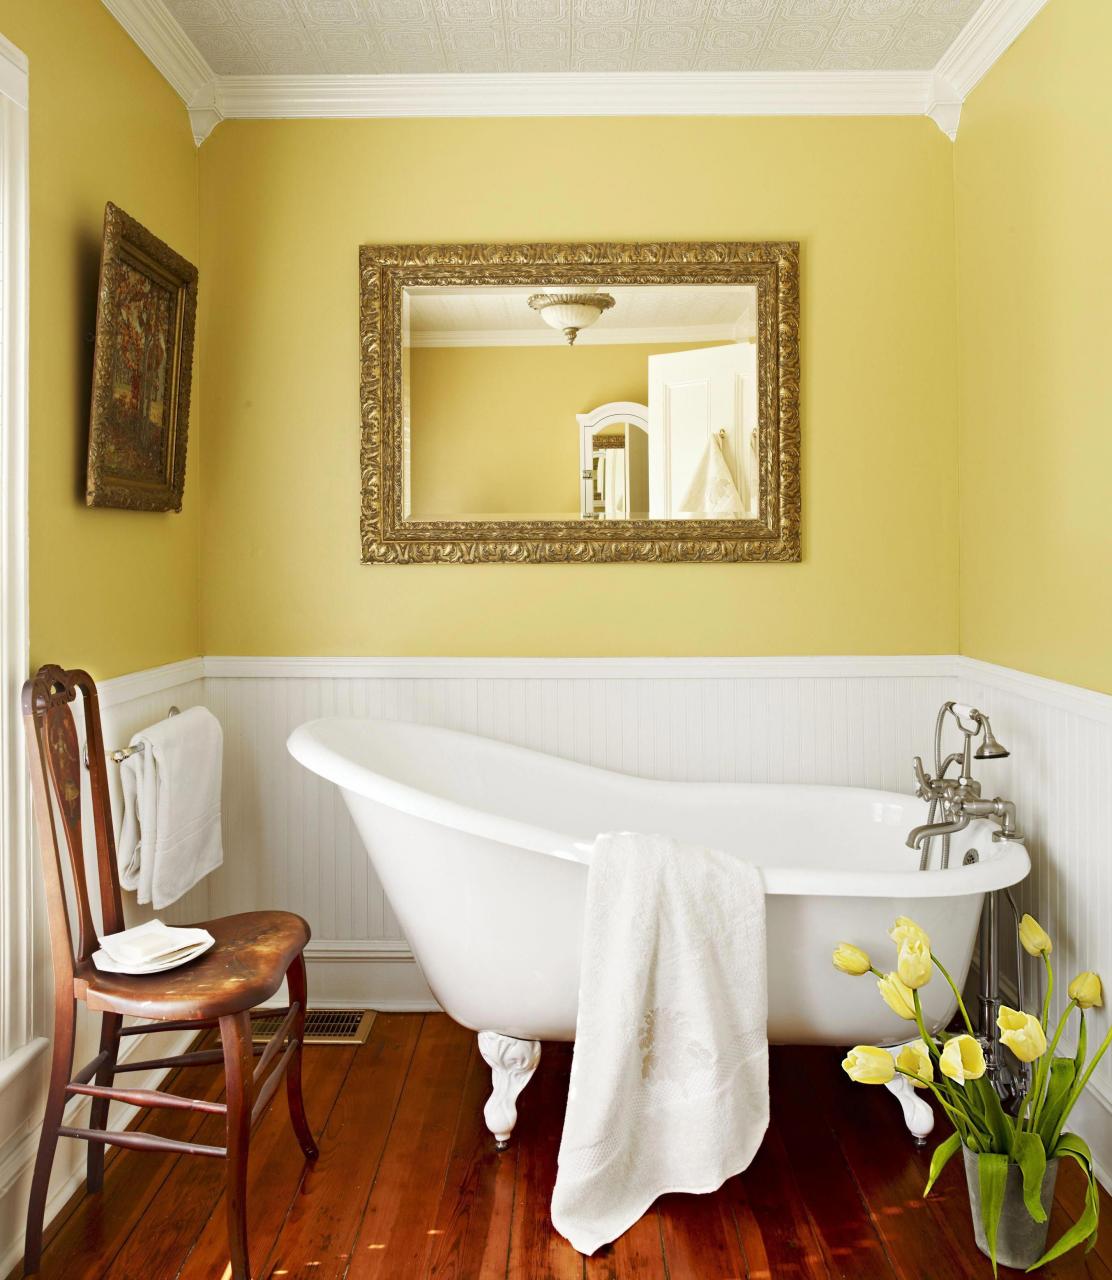 This might interest you. Bathroom Remodel Flooring in 2020 Yellow